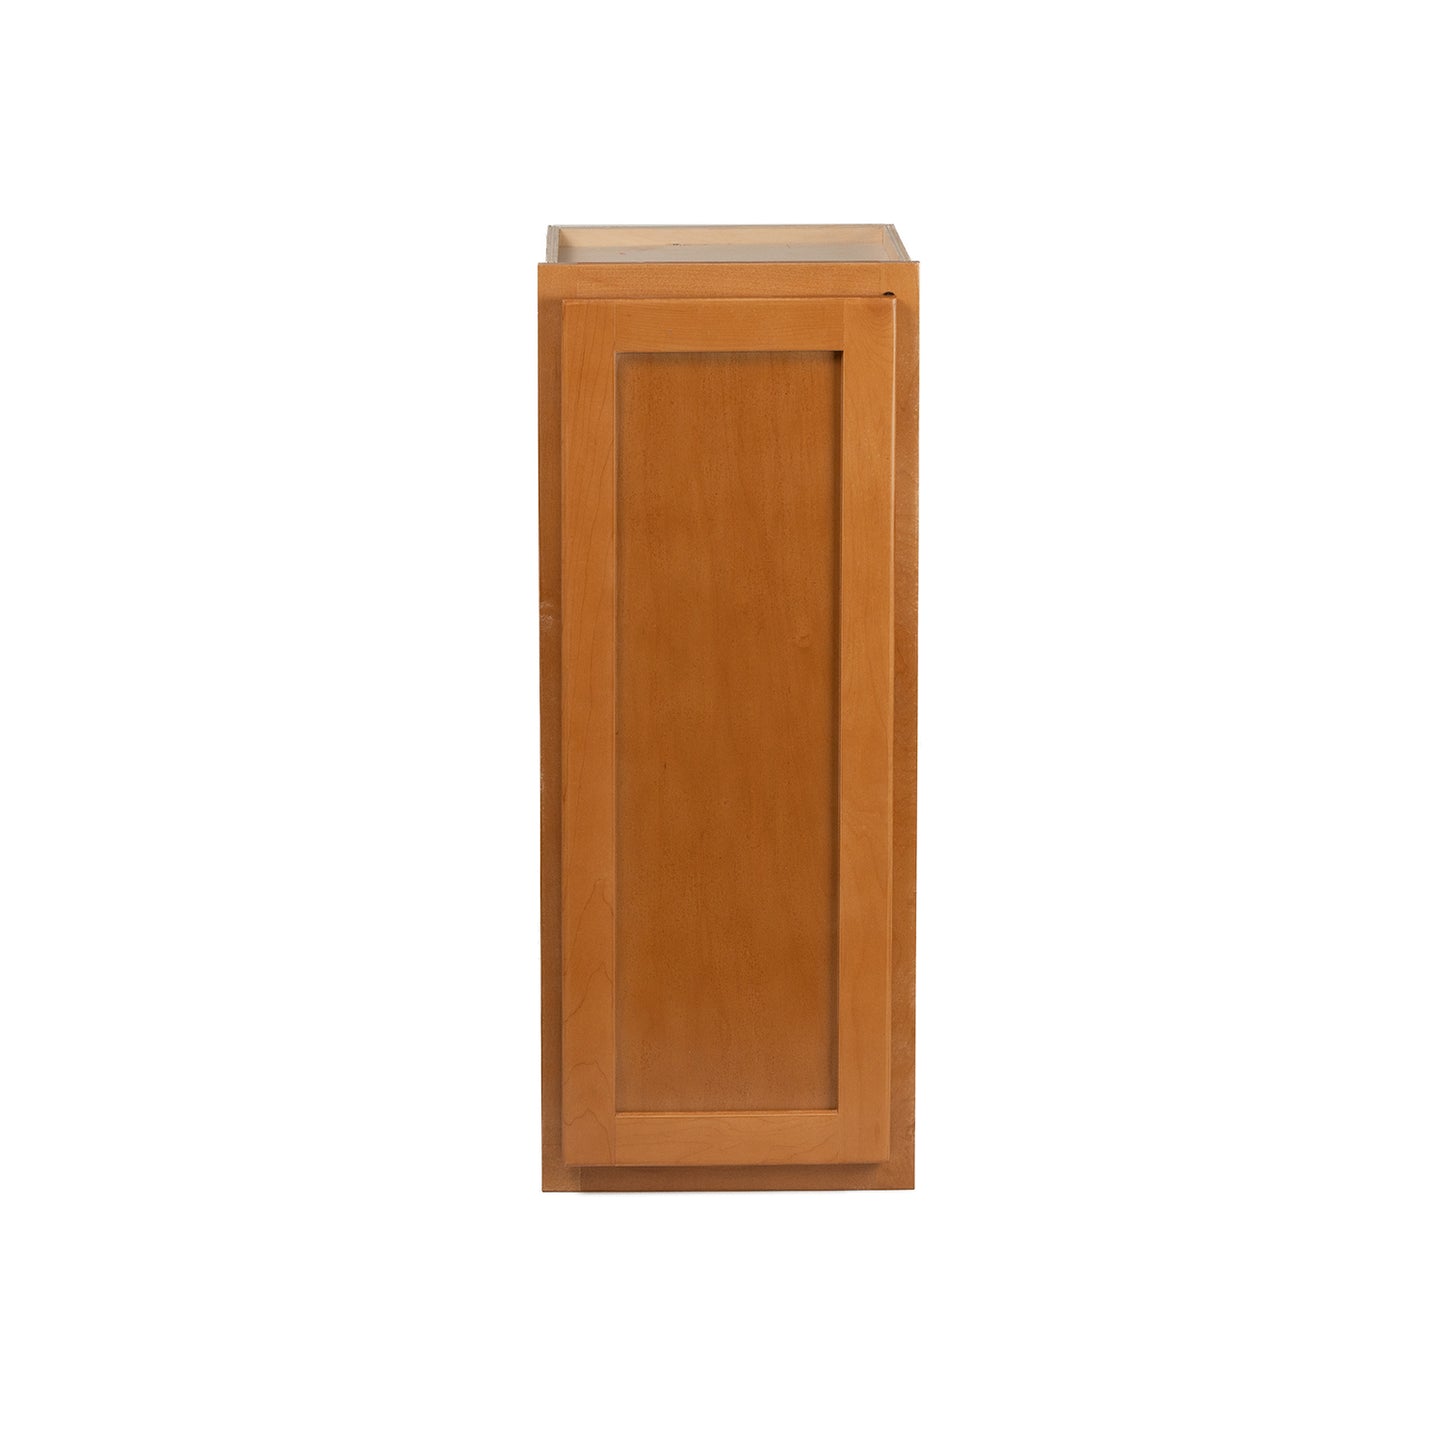 Quicklock RTA (Ready-to-Assemble) Provincial Stain 15"Wx30"Hx12"D Wall Cabinet